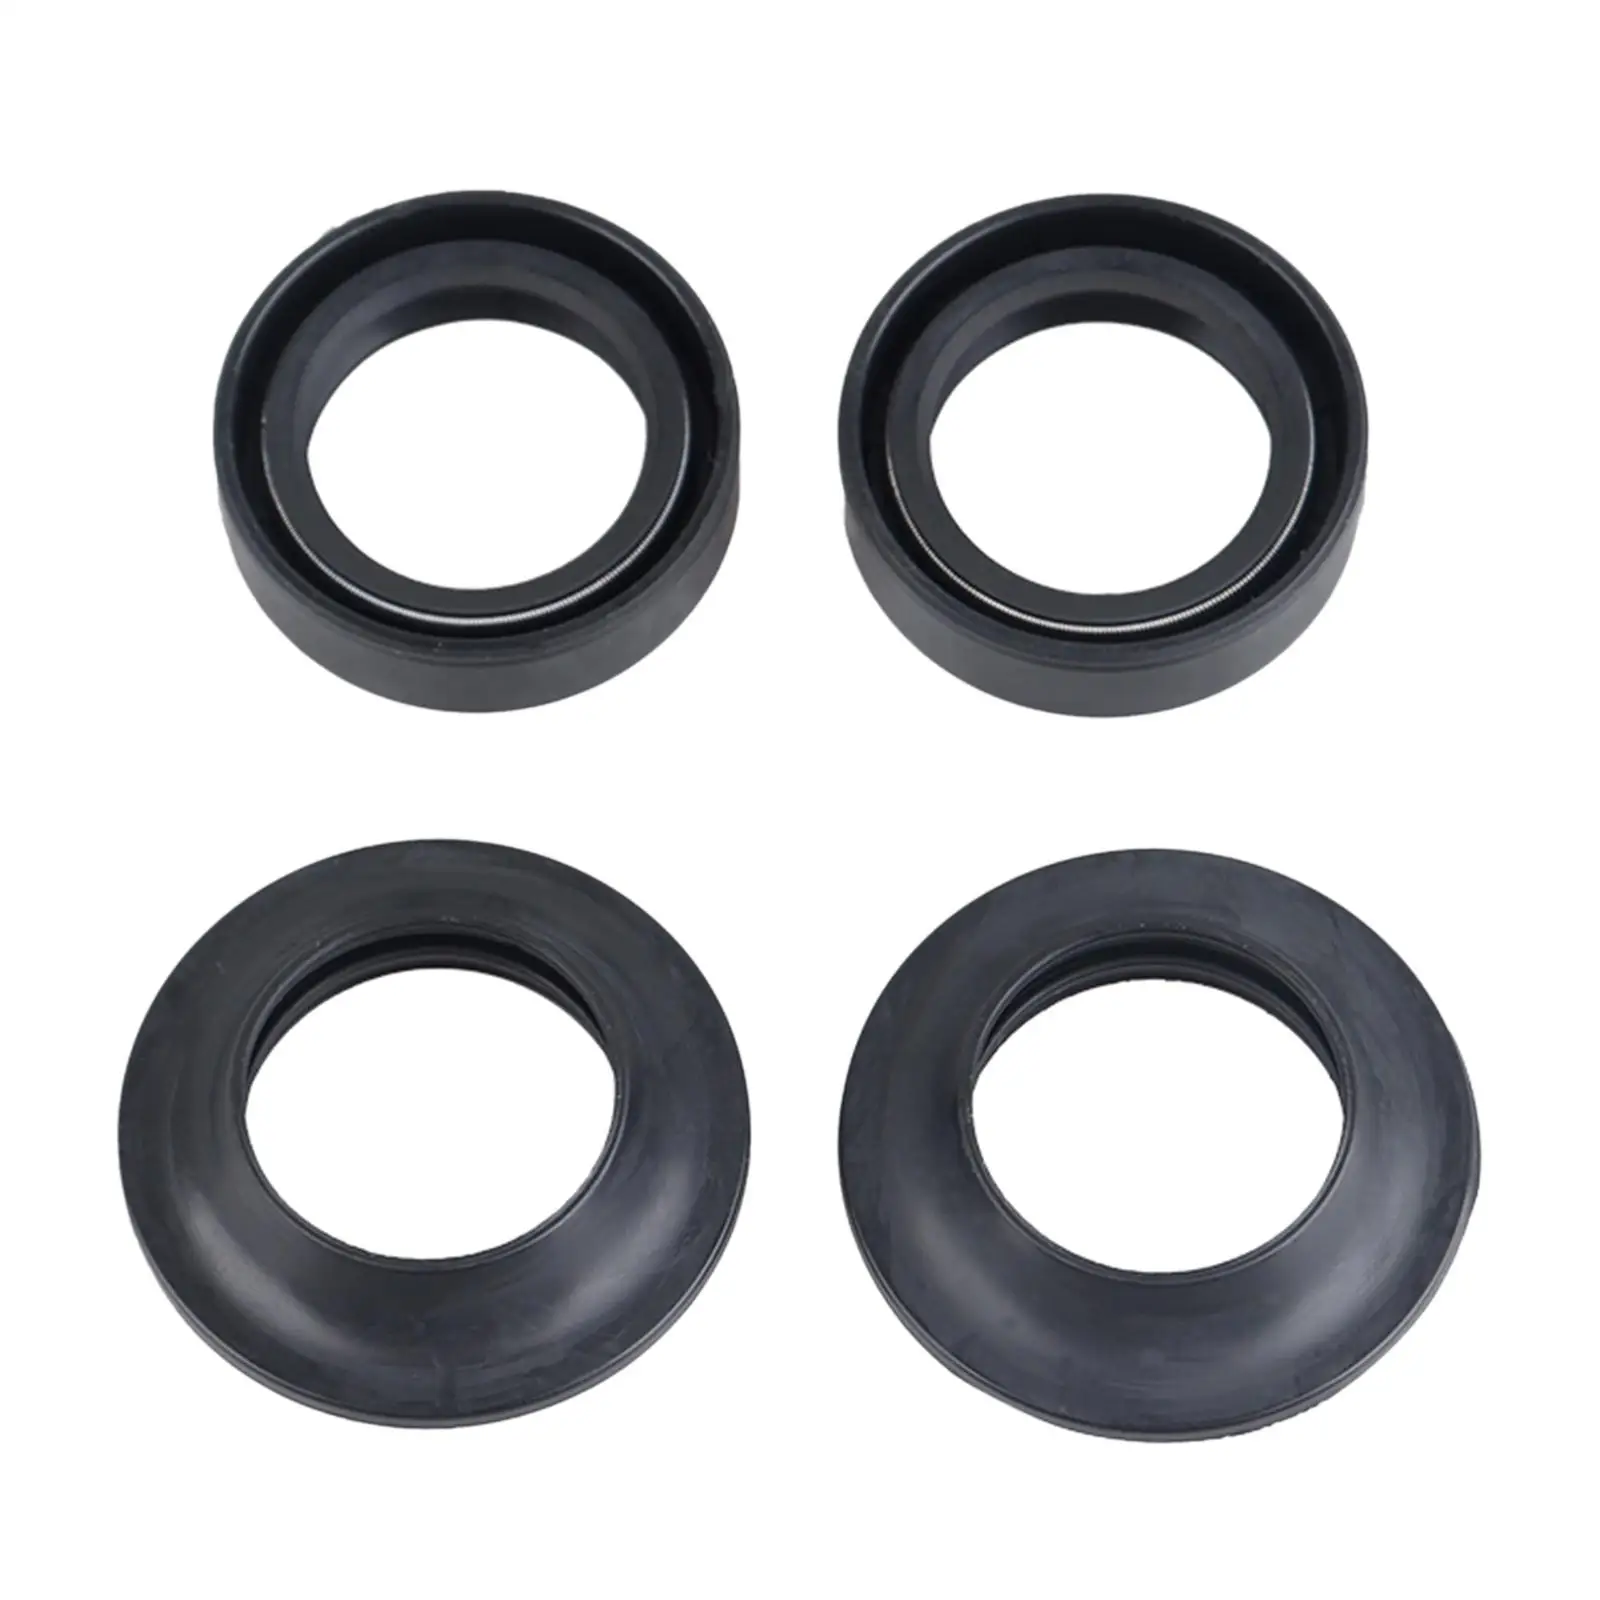 4 Pieces Front Fork Dust and Oil Seal Kit Replaces for Yamaha Yz60